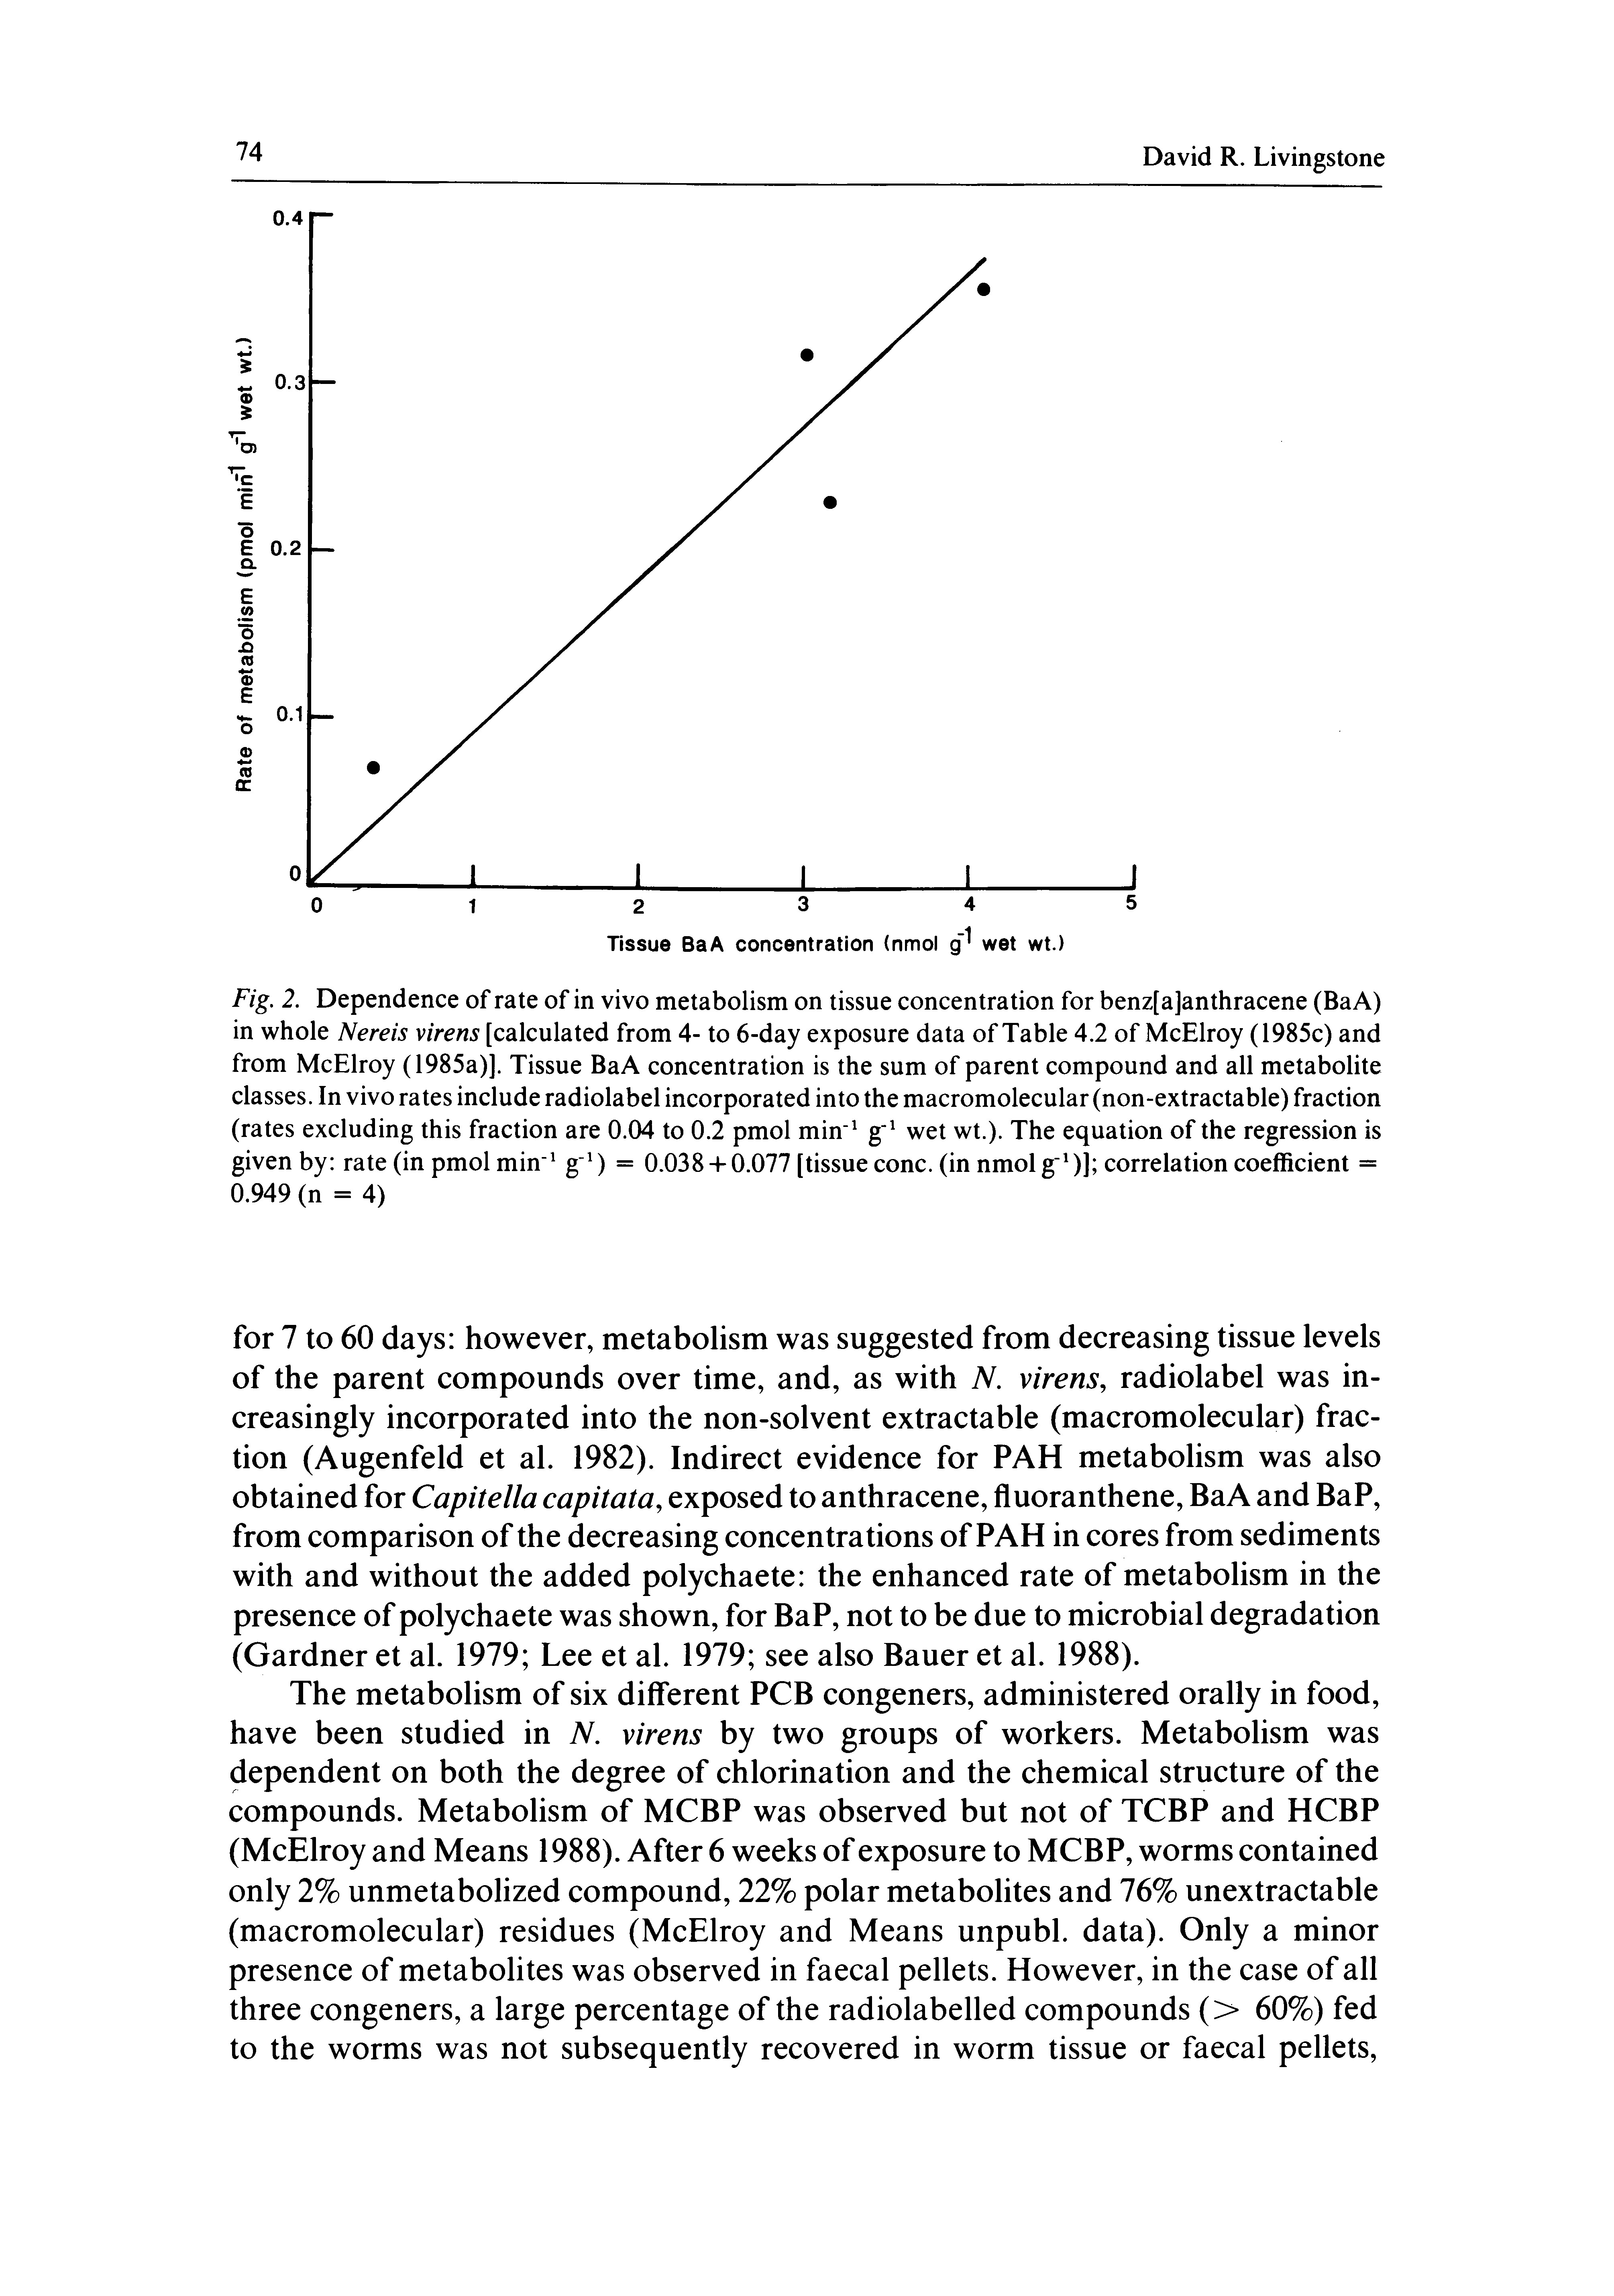 Fig. 2. Dependence of rate of in vivo metabolism on tissue concentration for benz[a]anthracene (BaA) in whole Nereis virens [calculated from 4- to 6-day exposure data of Table 4.2 of McElroy (1985c) and from McElroy (1985a)]. Tissue BaA concentration is the sum of parent compound and all metabolite classes. In vivo rates include radiolabel incorporated into the macromolecular (non-extractable) fraction (rates excluding this fraction are 0.04 to 0.2 pmol min wet wt.). The equation of the regression is given by rate (in pmol min g ) = 0.038 + 0.077 [tissue cone, (in nmolg )] correlation coefficient = 0.949 (n = 4)...